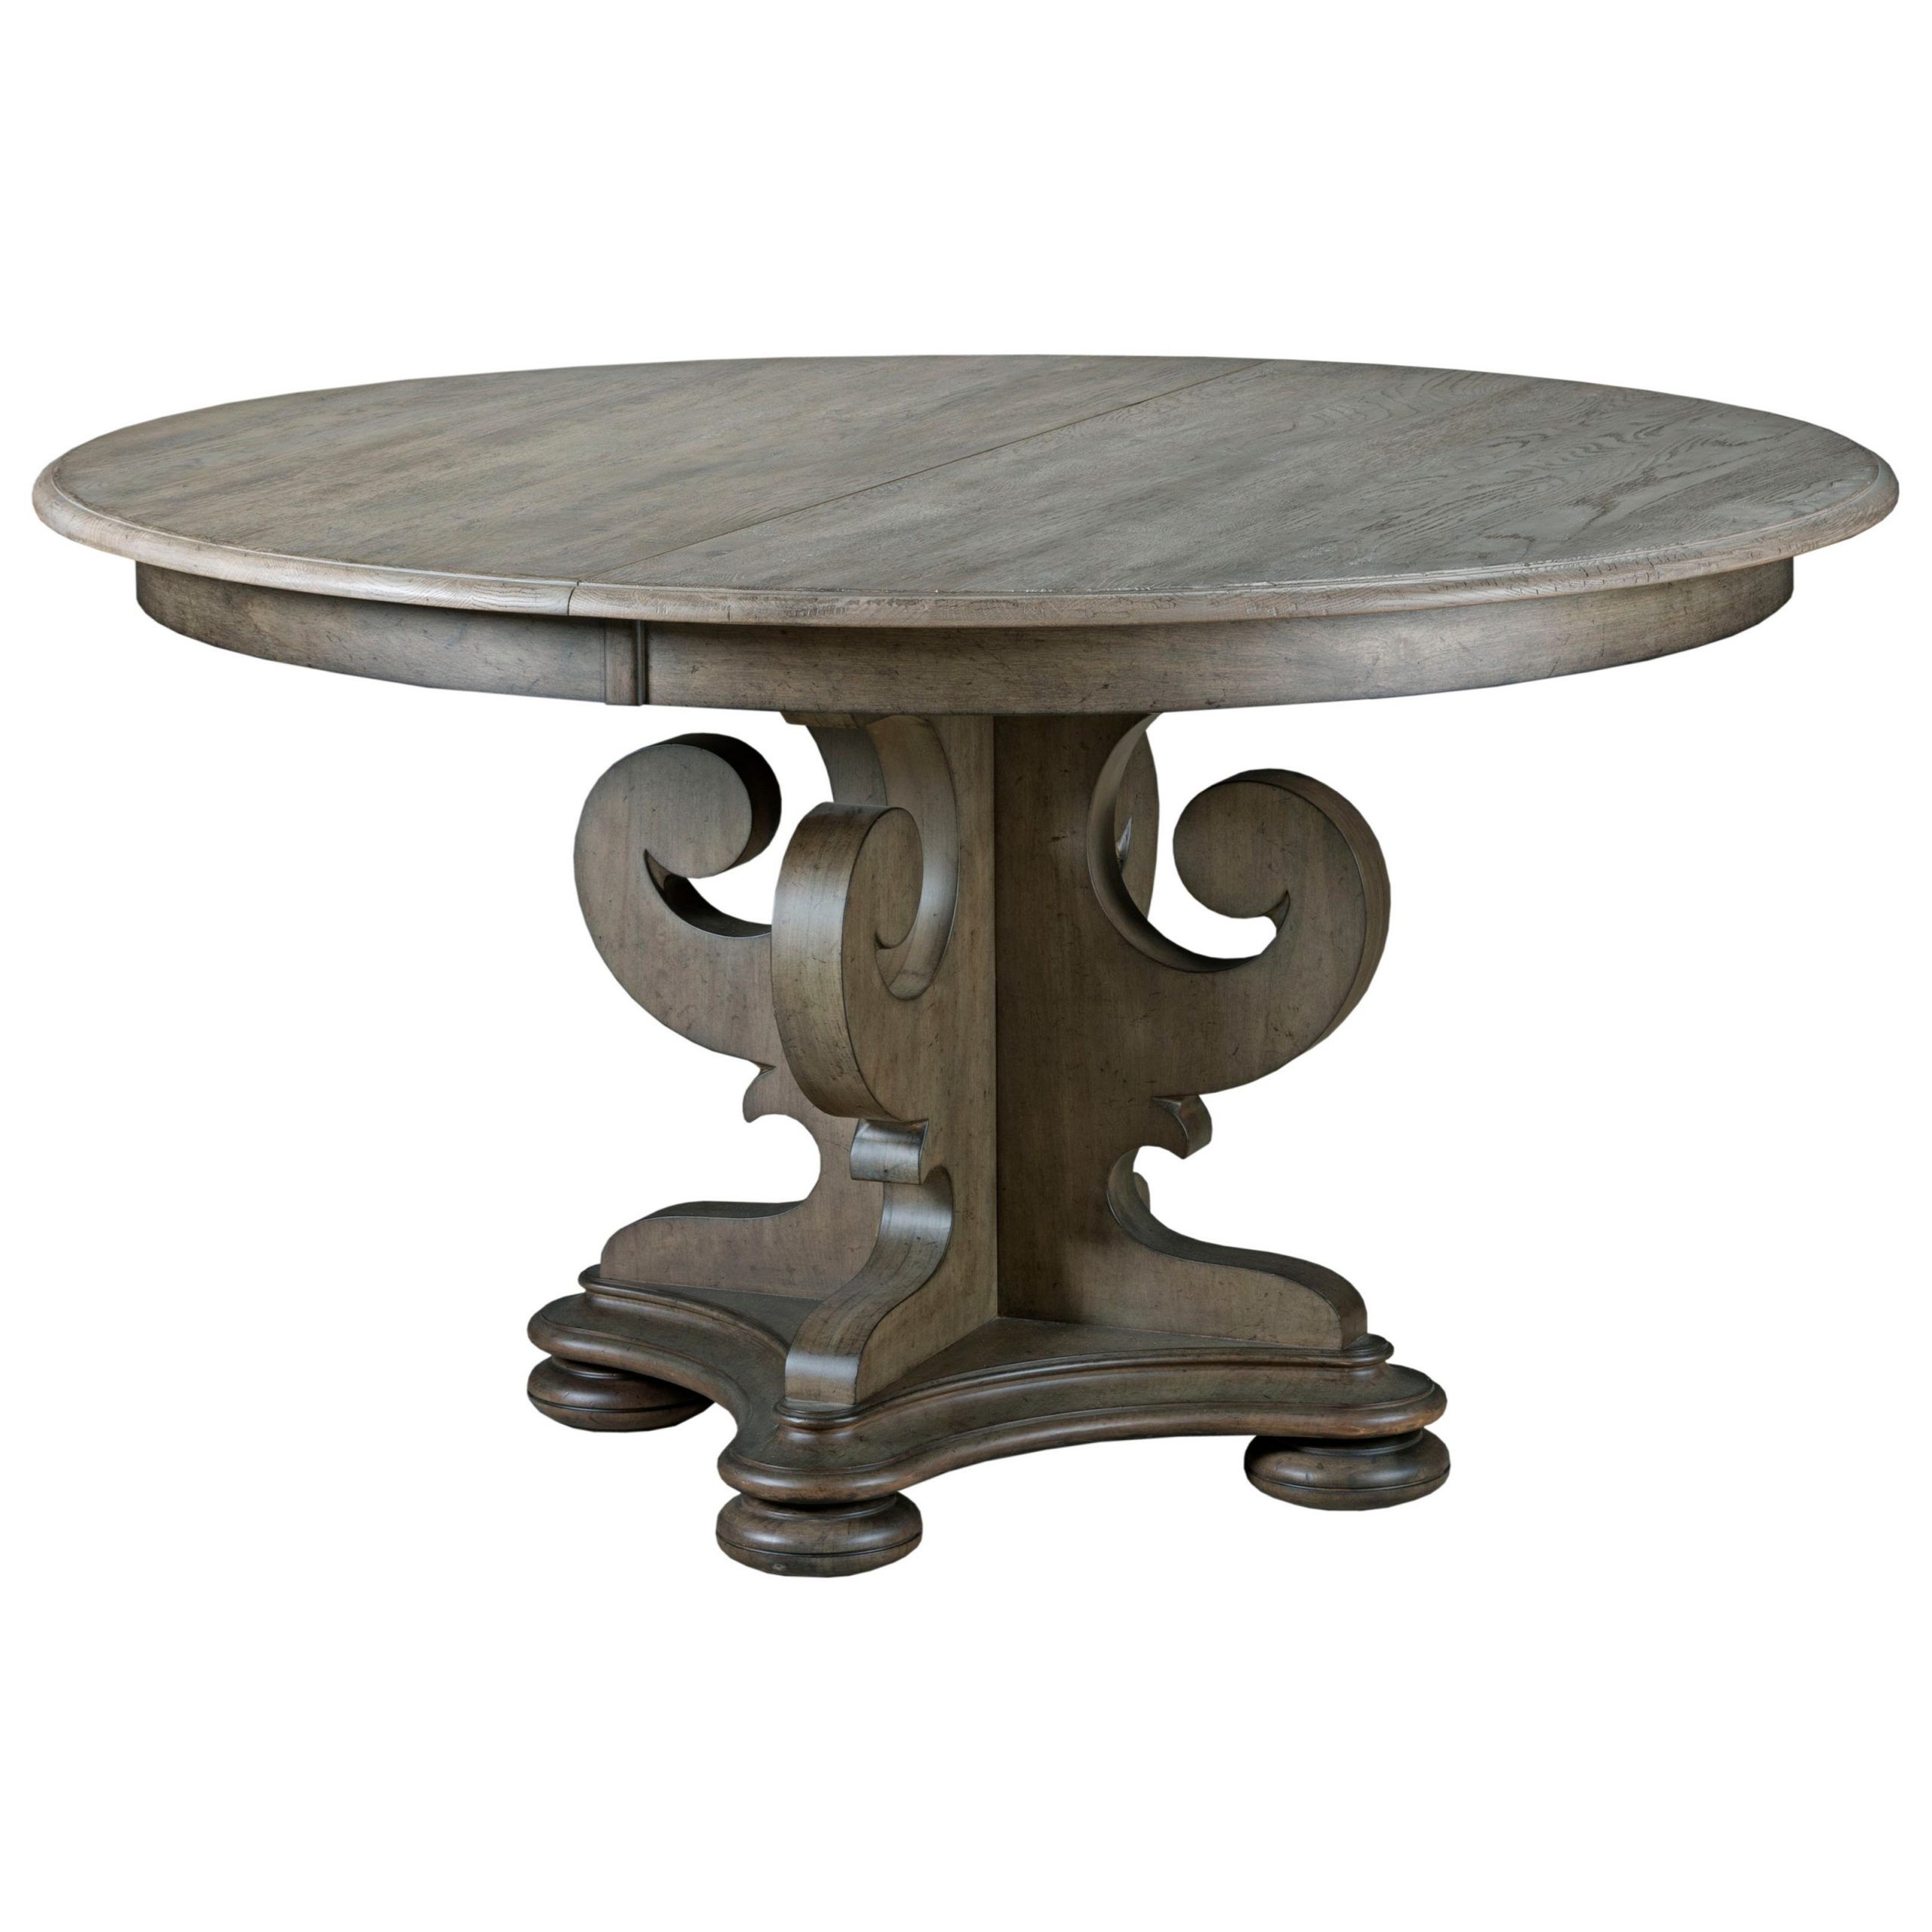 Most Recently Released Kincaid Furniture Greyson Grant Scrolled Pedestal Round Throughout Dawson Pedestal Dining Tables (View 22 of 25)